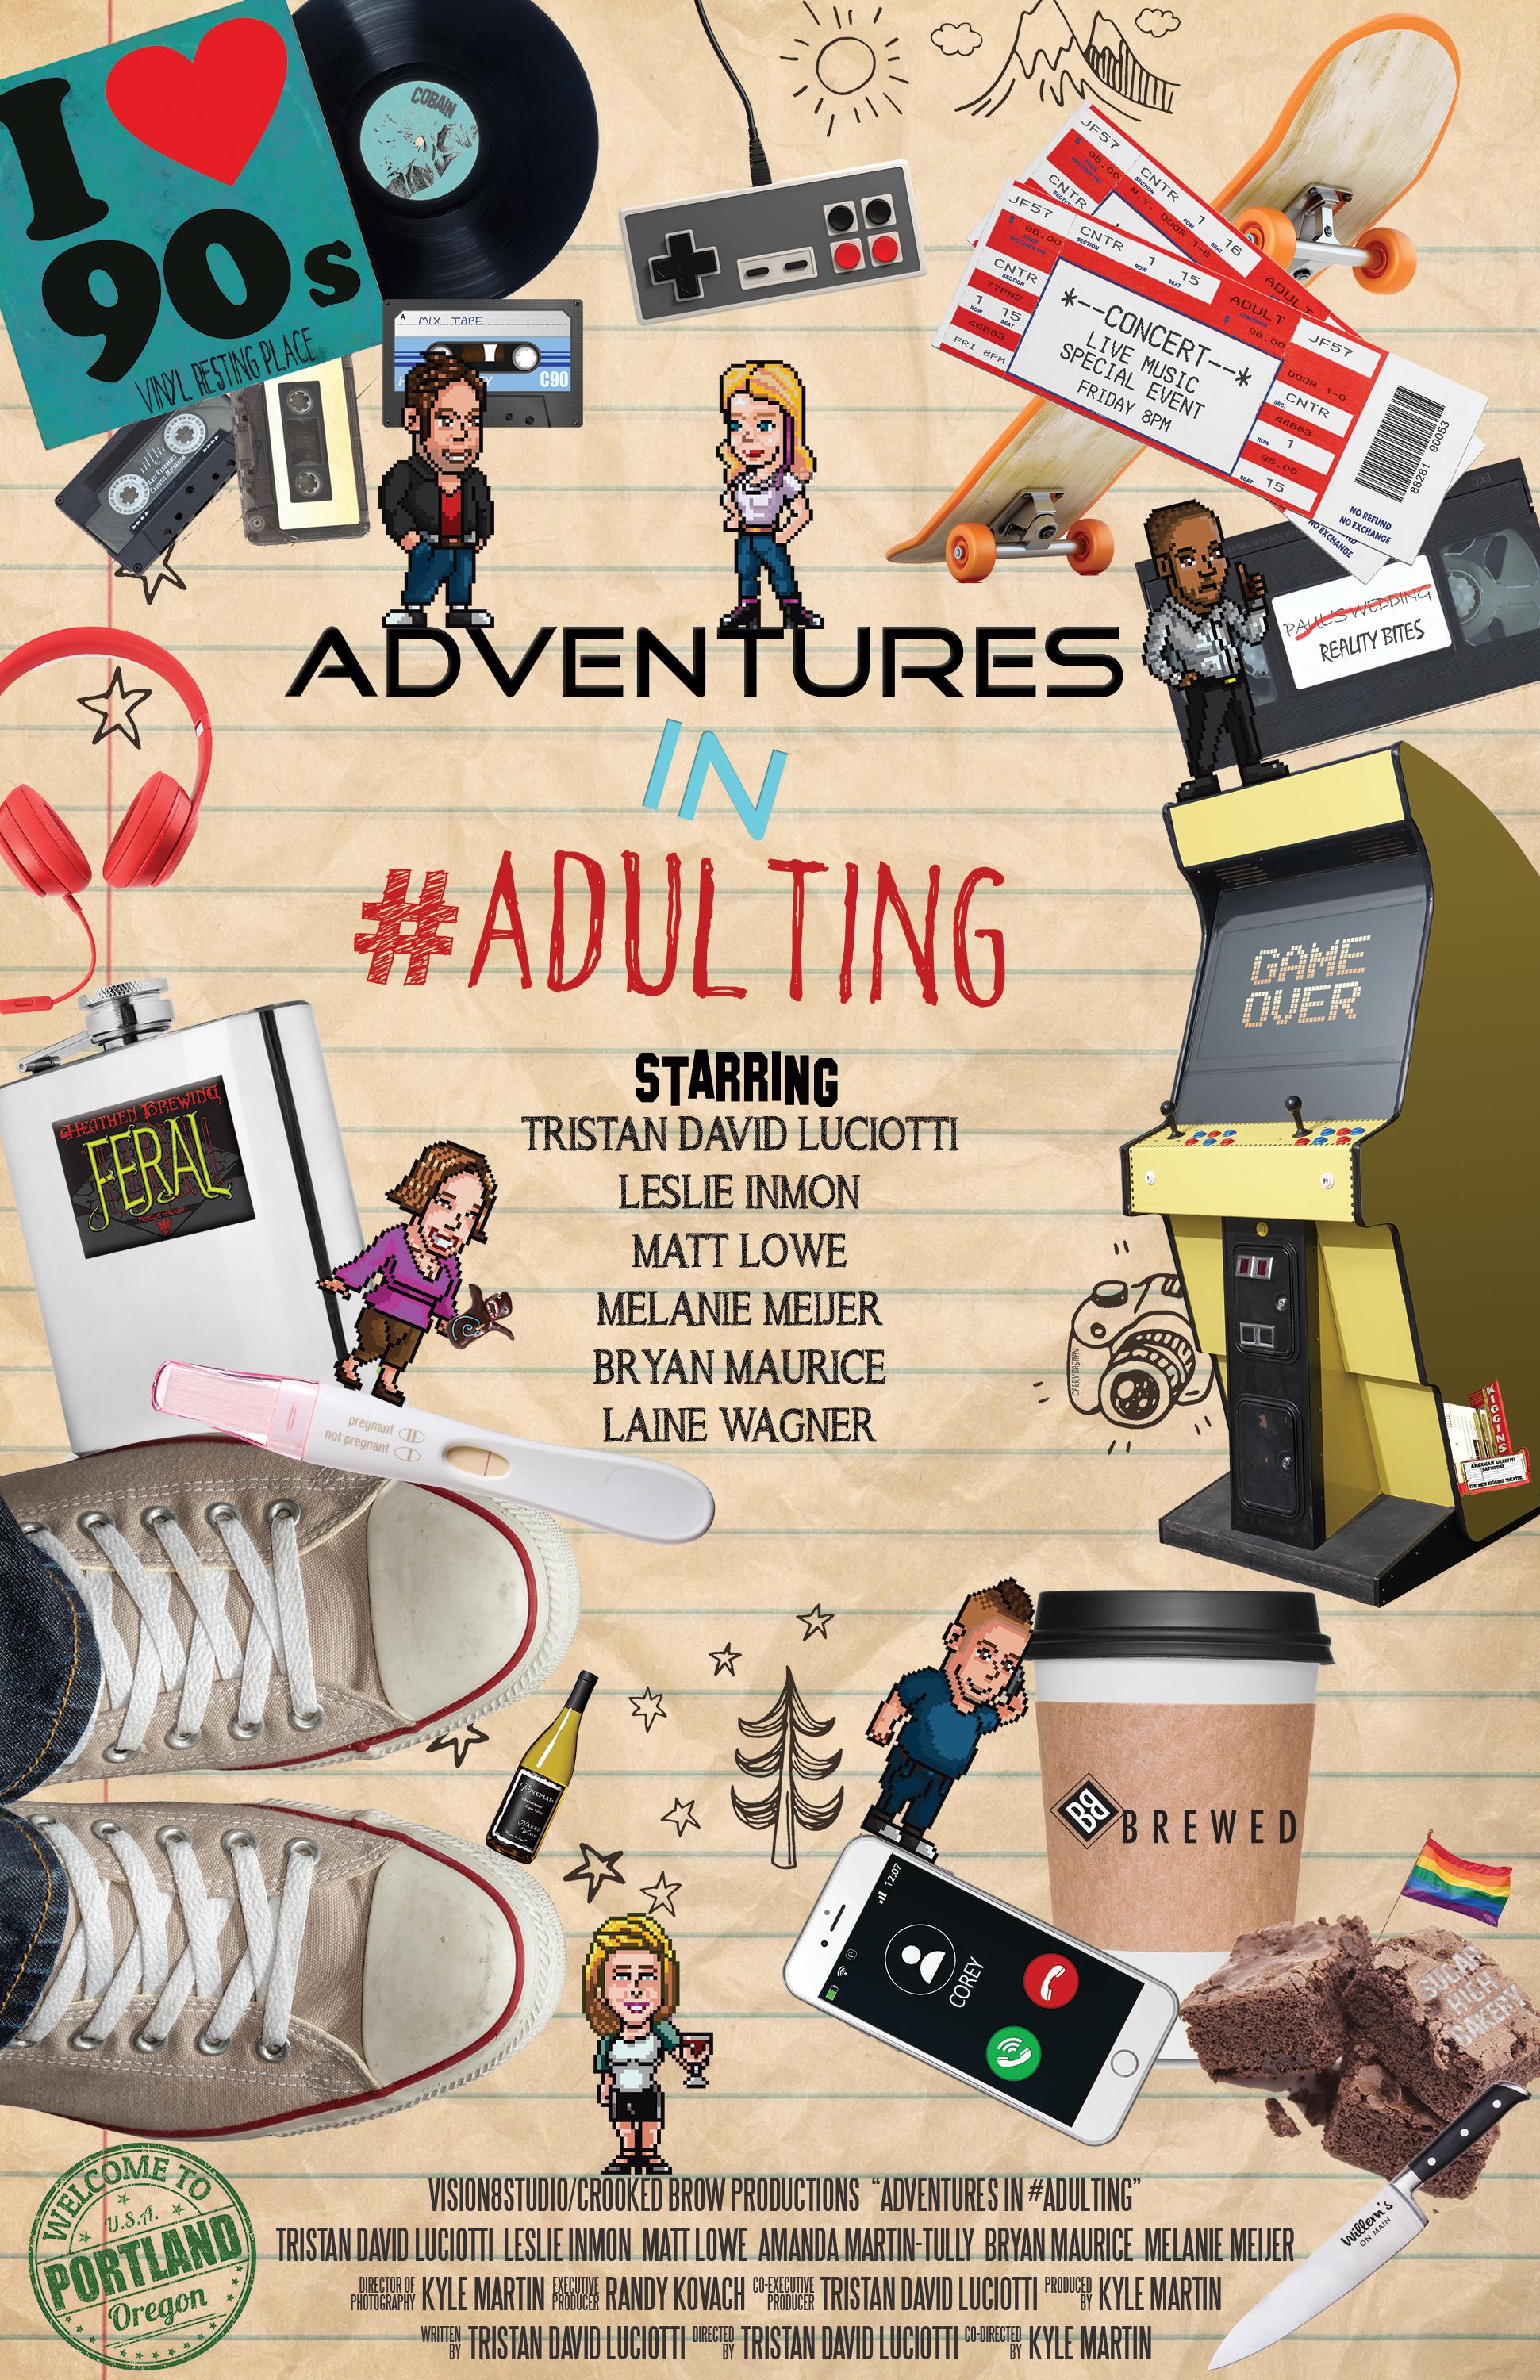 Adventures in #Adulting